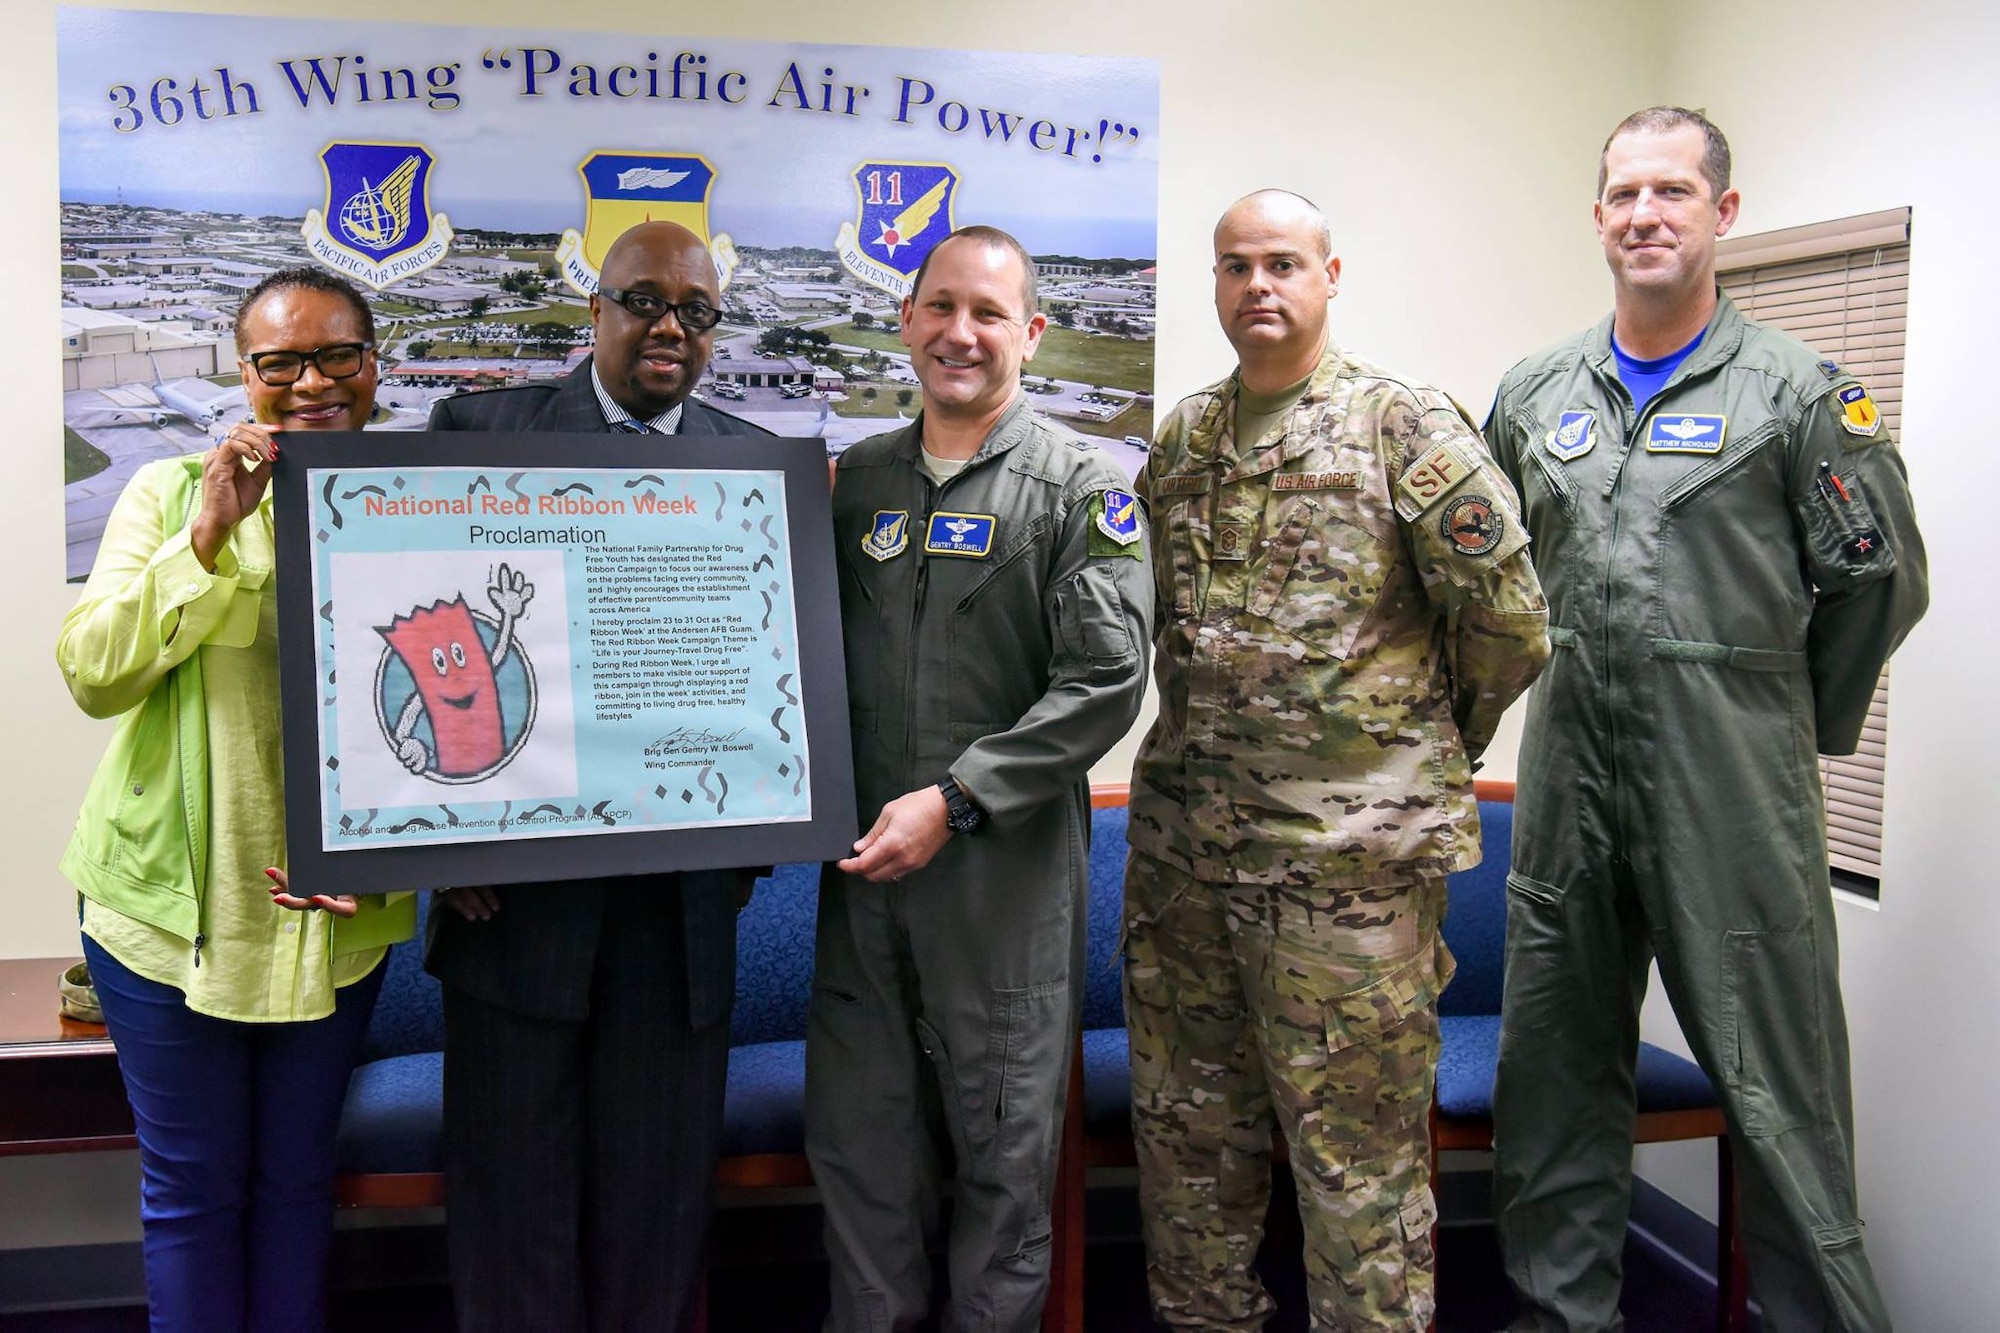 U.S. Air Force Brig. Gen. Gentry Boswell, 36 Wing Commander, signs a proclamation kicking off Red Ribbon week at Andersen Air Force Base, Guam, Oct. 26, 2018. (U.S. Air Force photo by Senior Airman Christopher Quail)